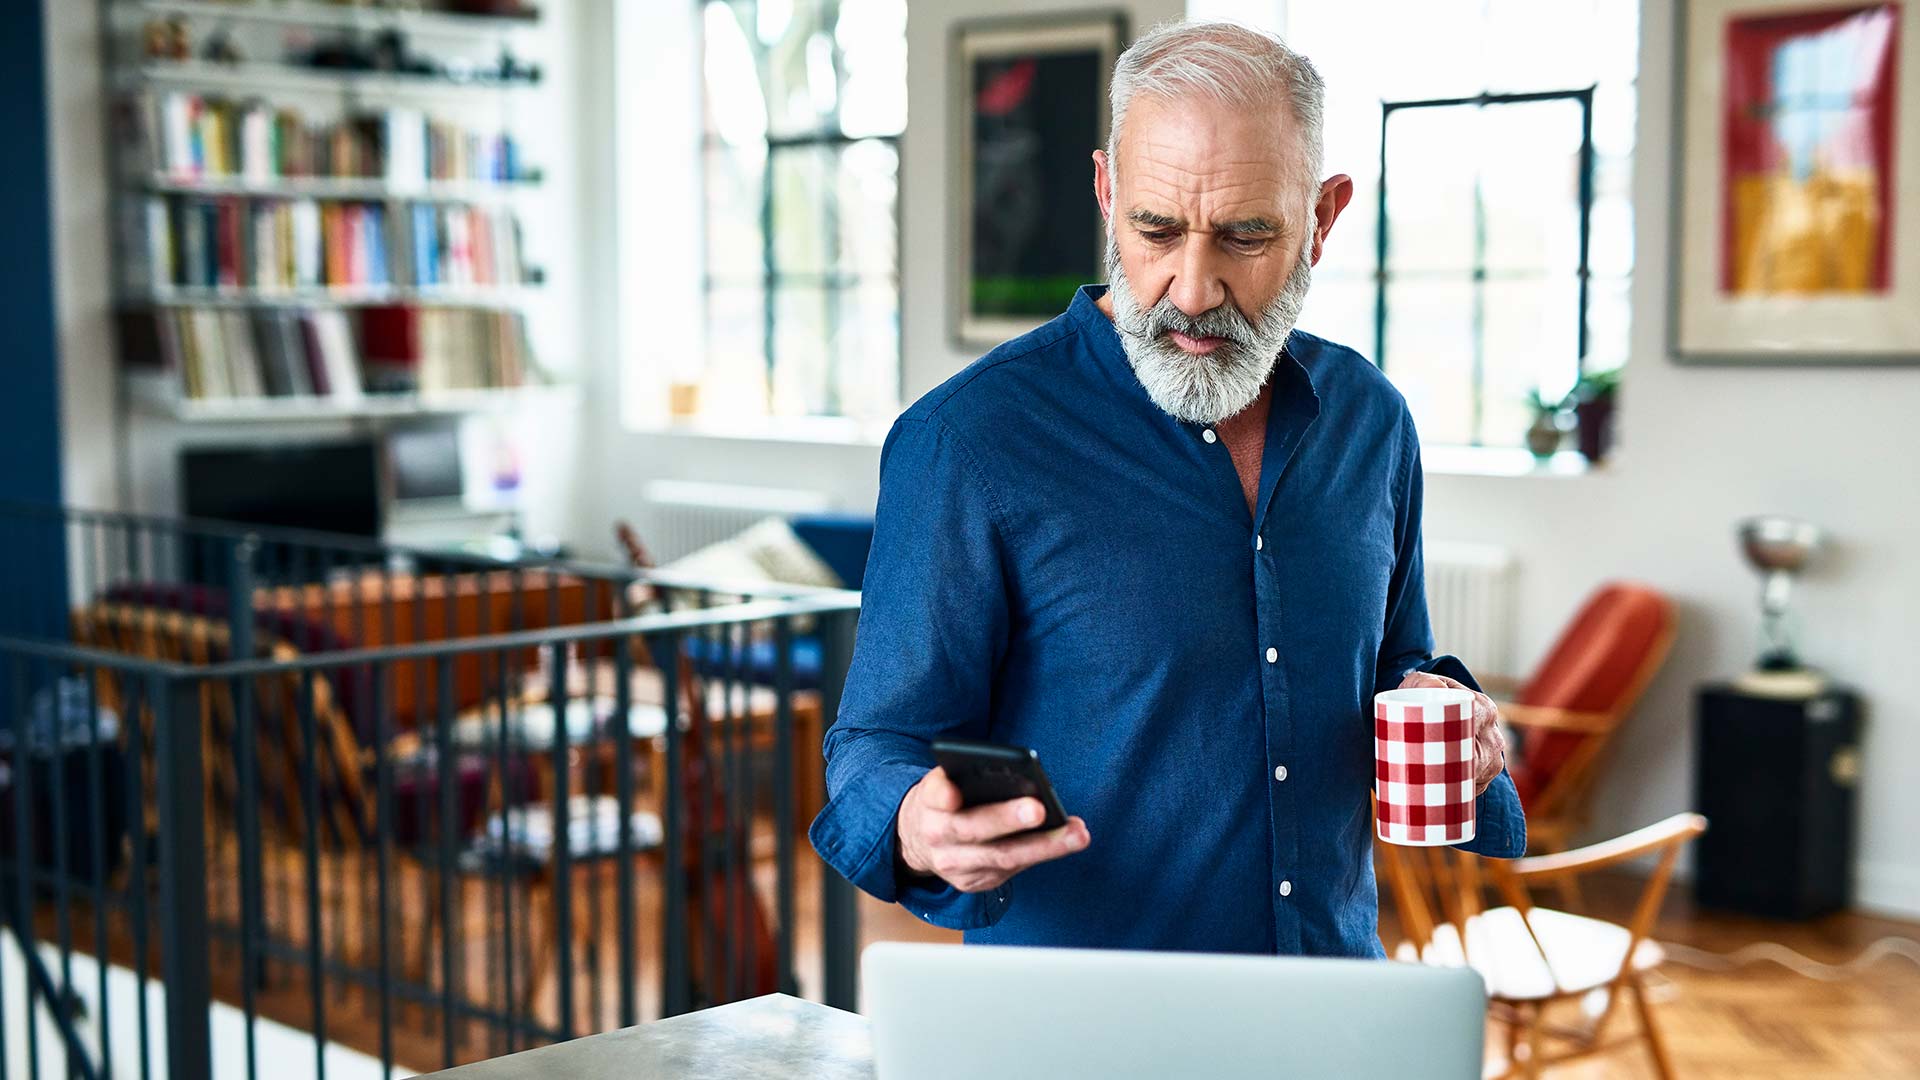 Man in home looking at his phone while holding a cup of coffee.